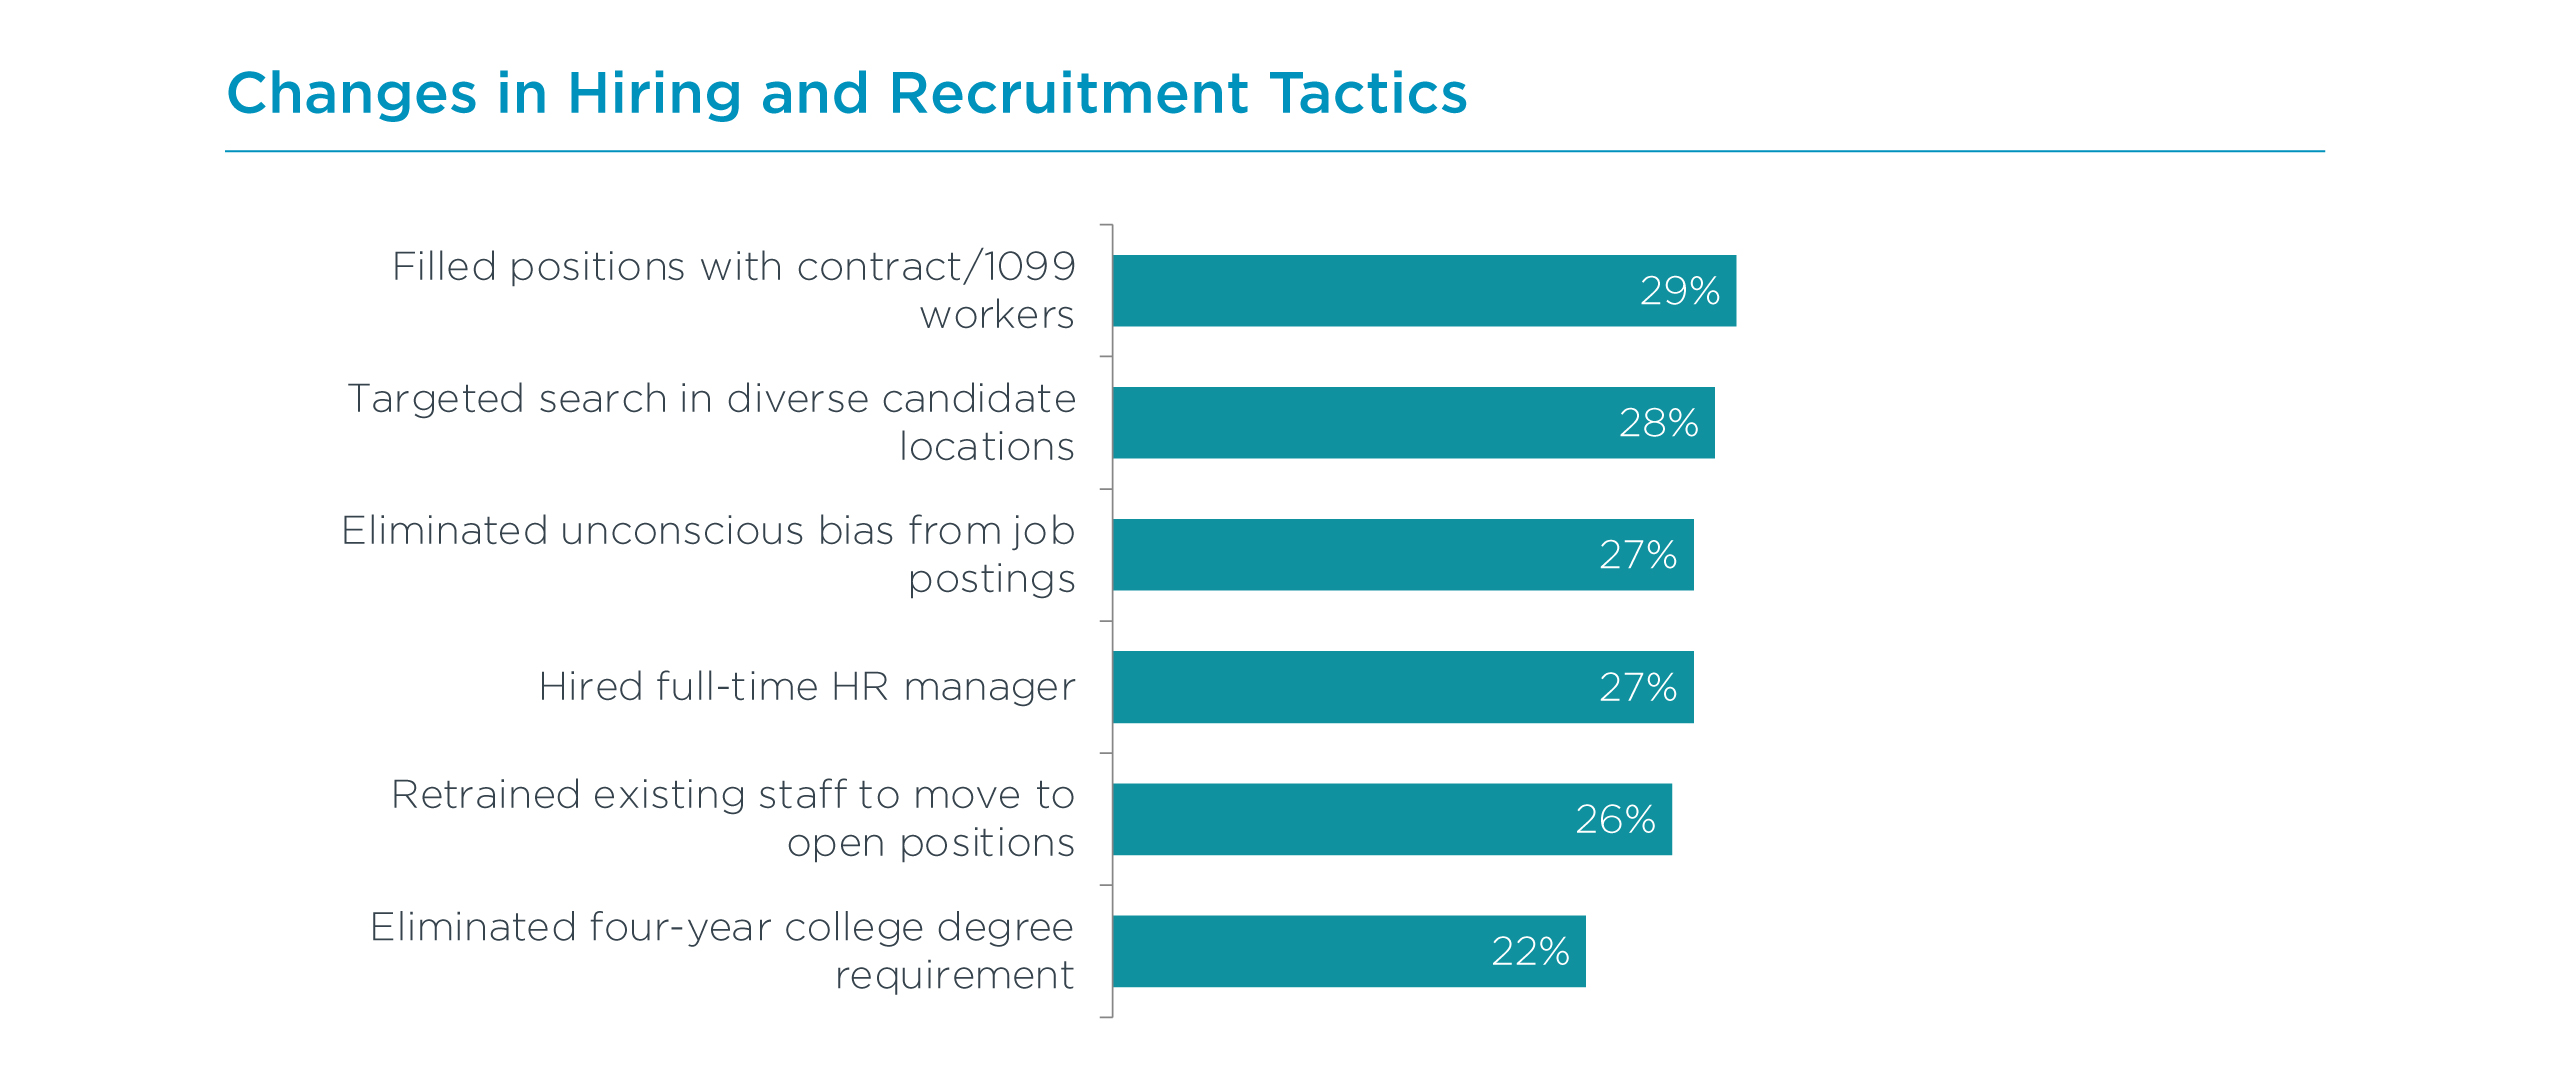 Changes in Hiring and Recruitment Tactics